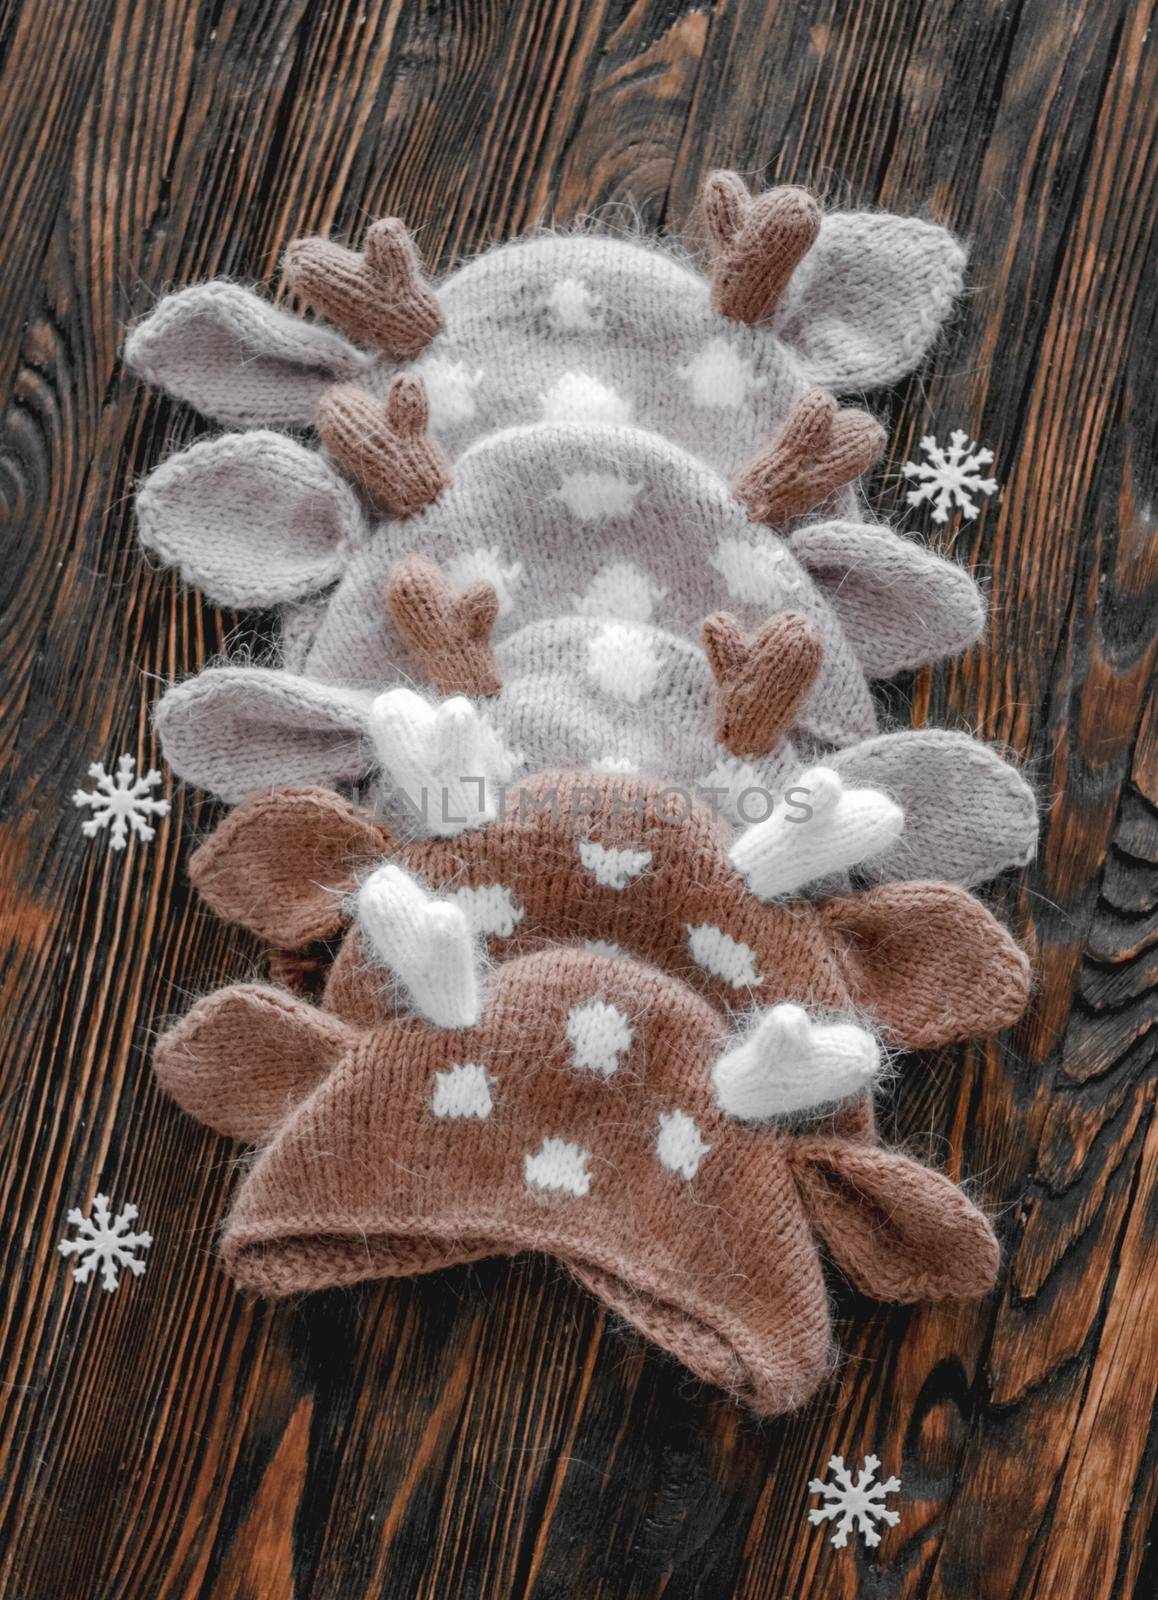 Knitted newborn hats for infant Christmas studio photoshoot on wooden background closeup